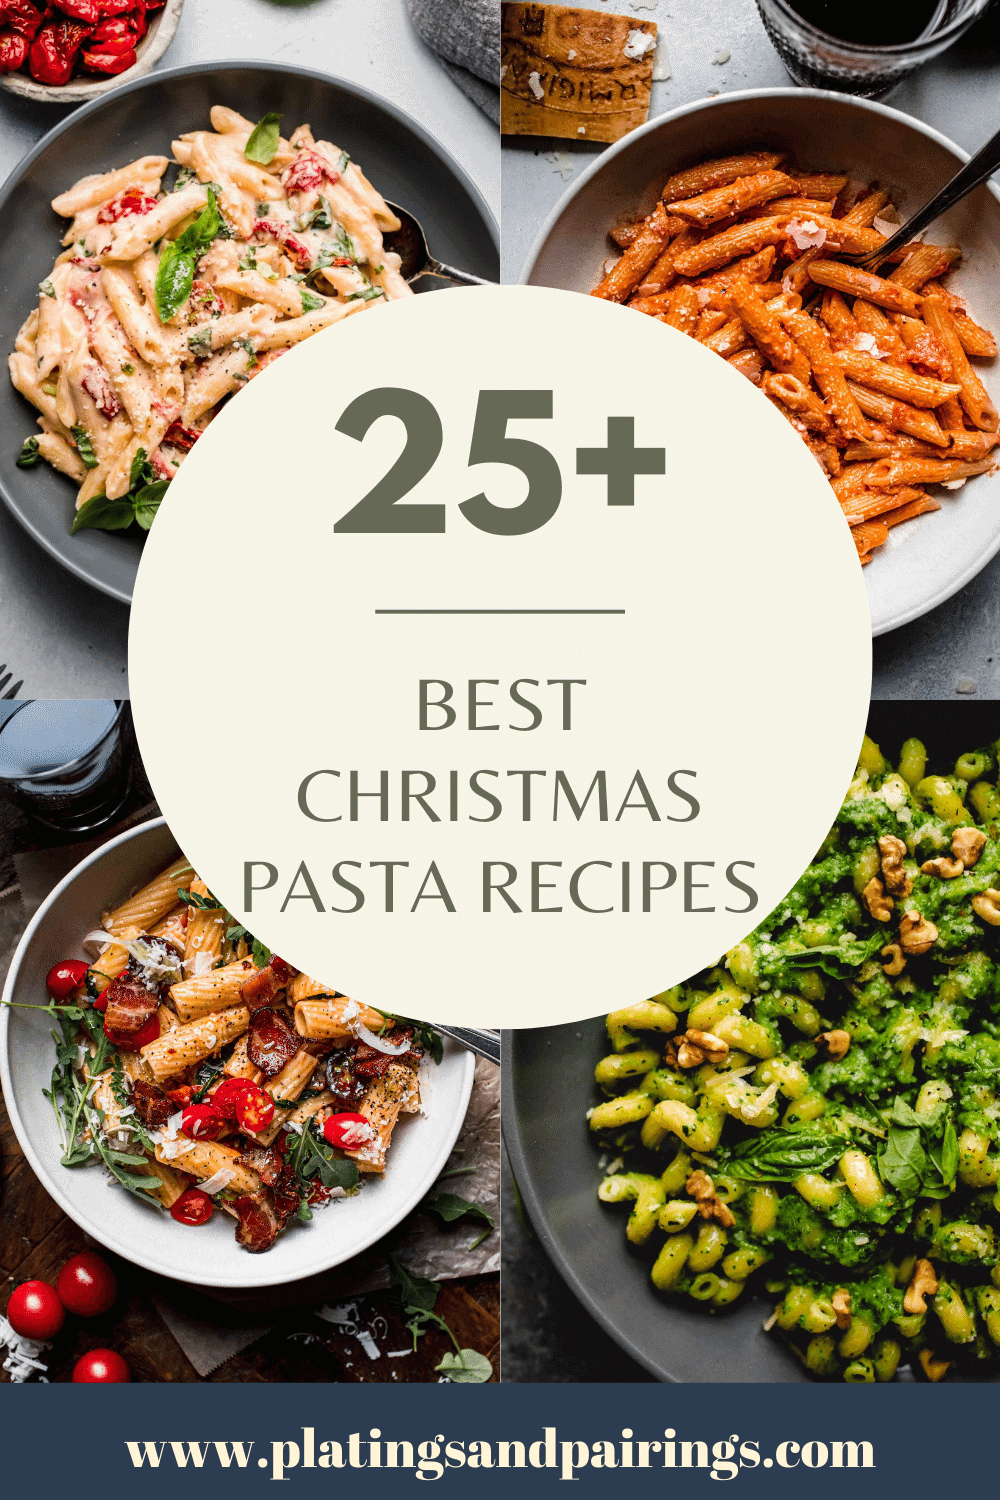 Collage of pasta recipes with text overlay - Best Christmas Pasta Recipes.